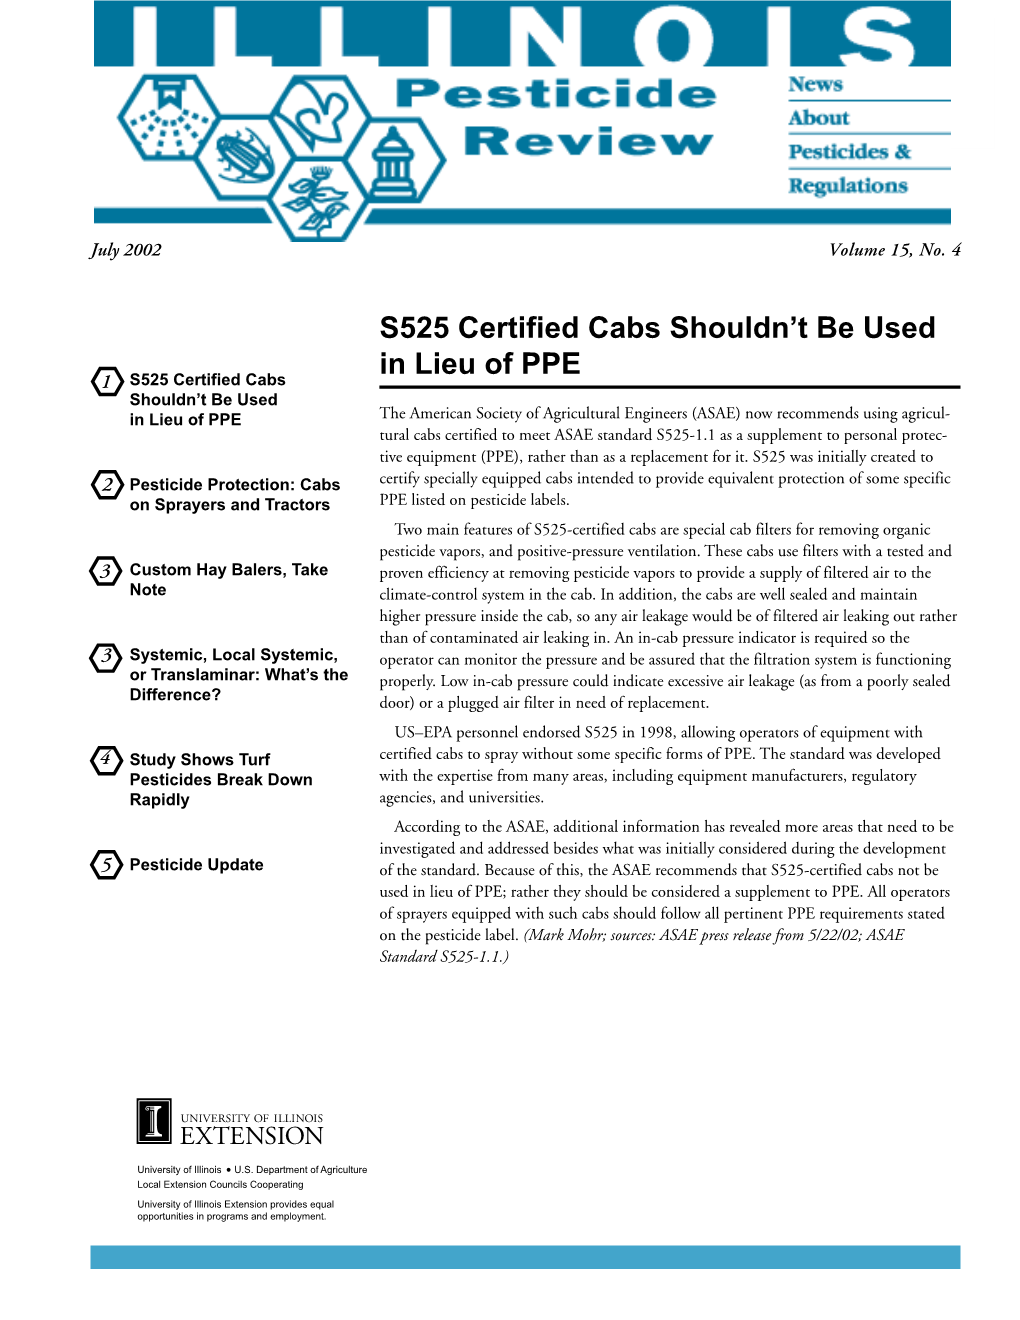 S525 Certified Cabs Shouldn't Be Used in Lieu Of